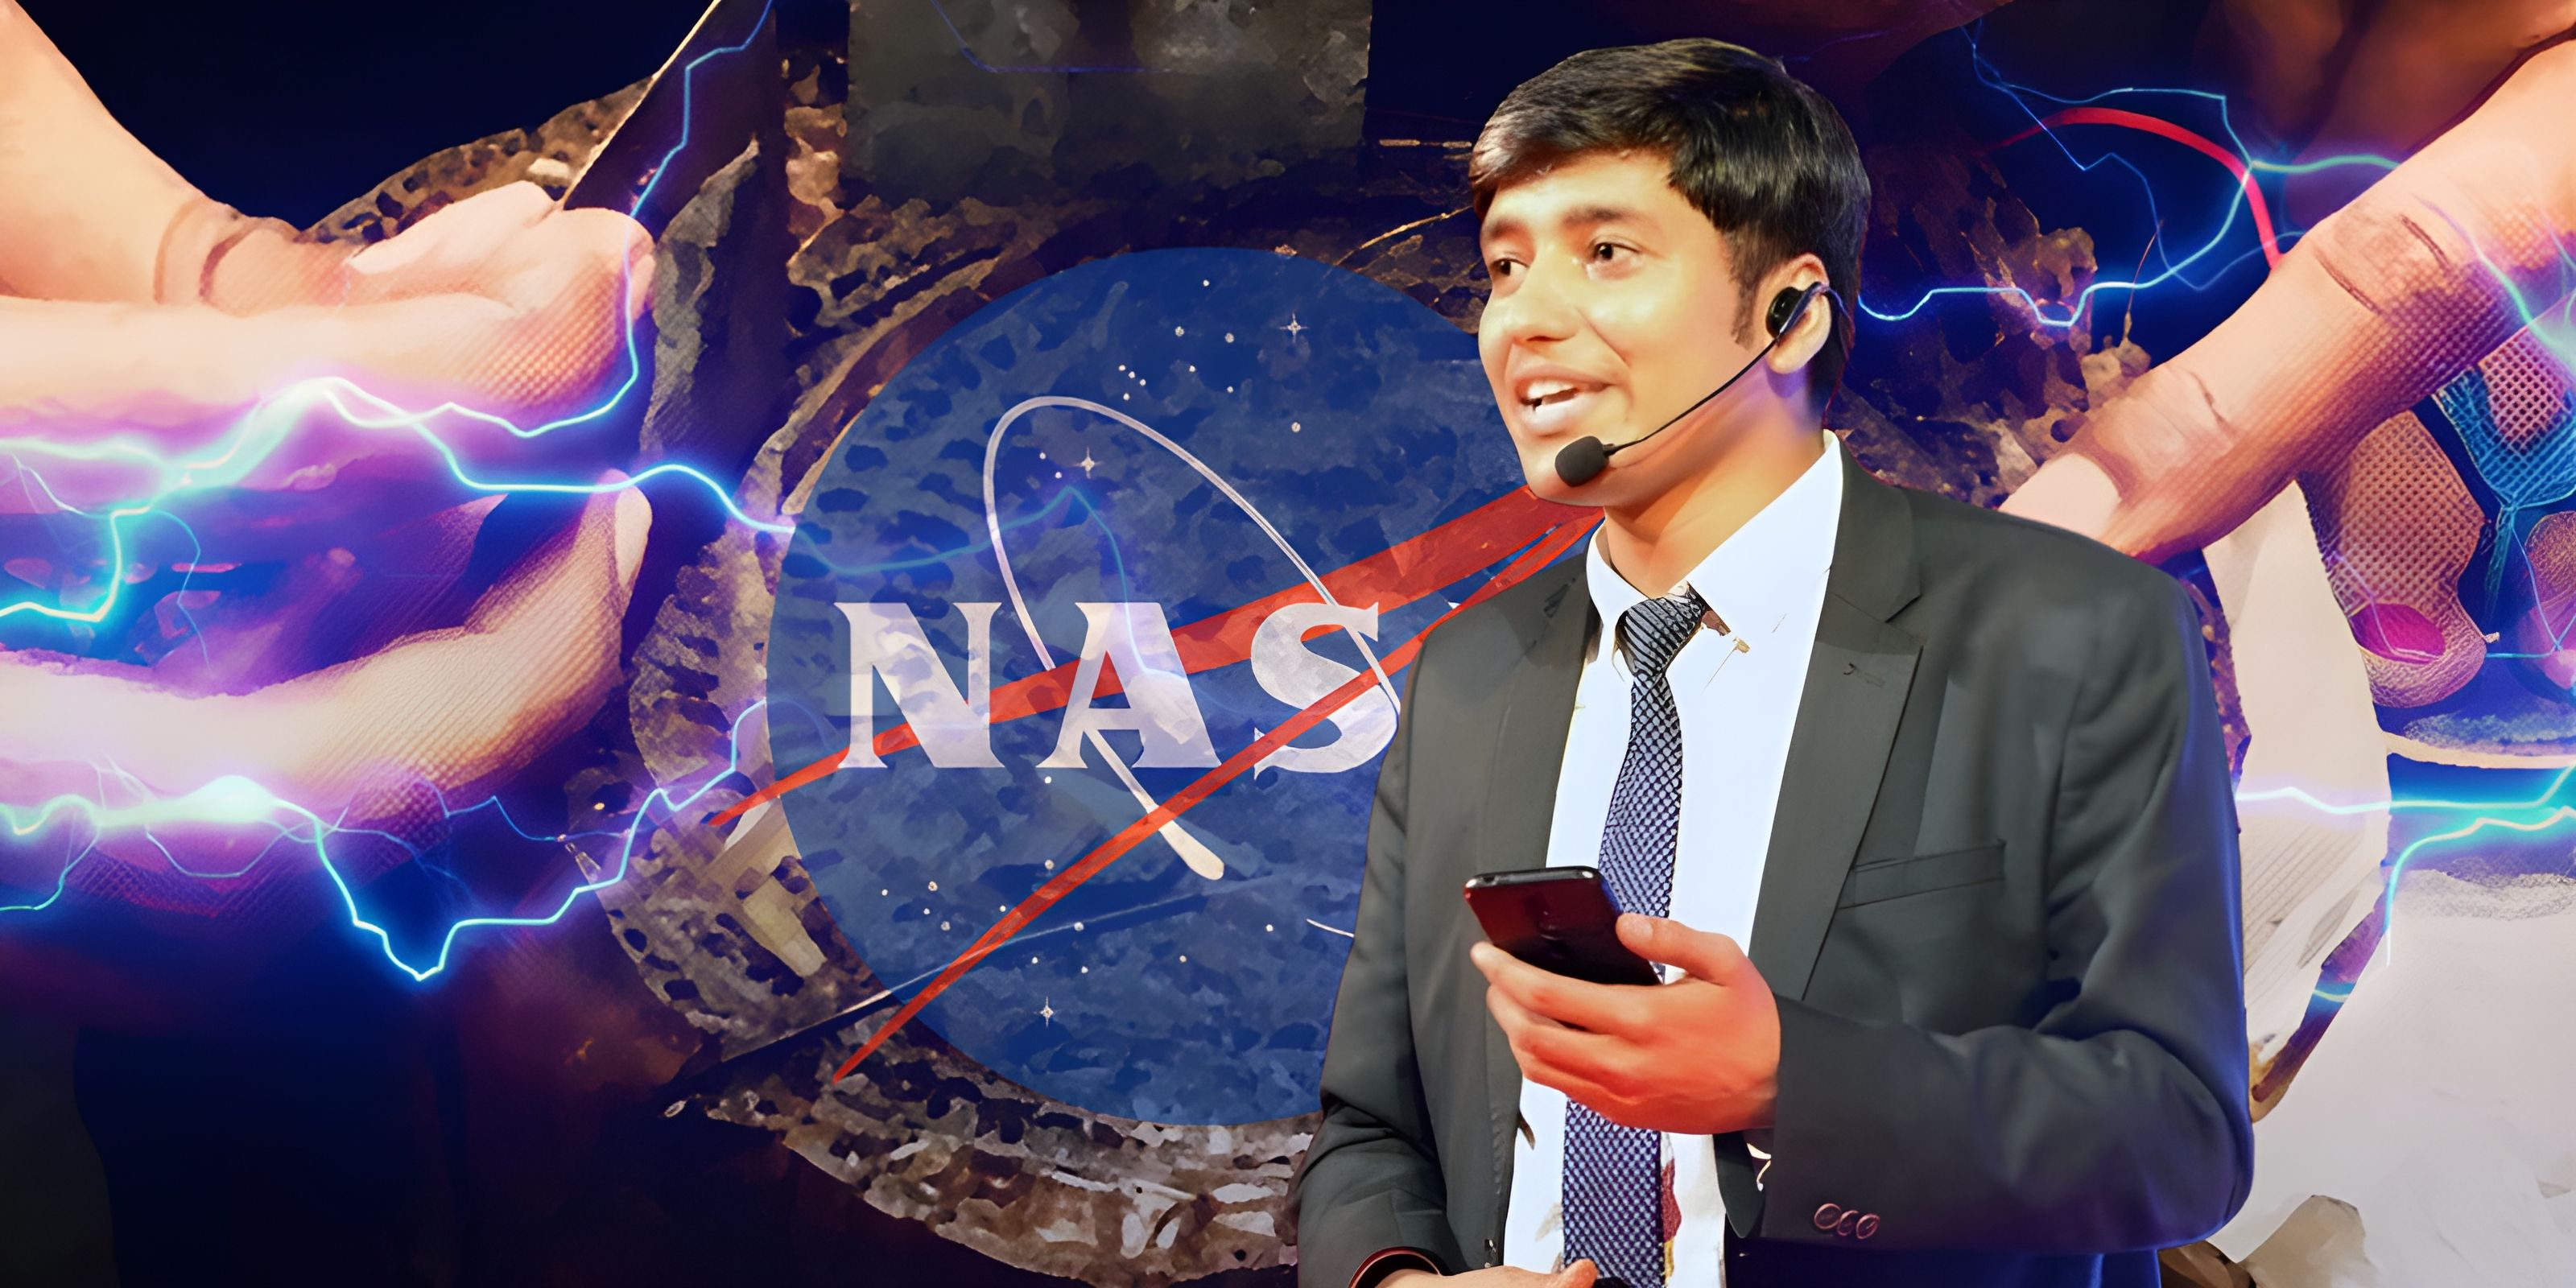 Gopal of Bhagalpur: The 19-Year-Old Kid Who Rejected NASA to Shape India's Future